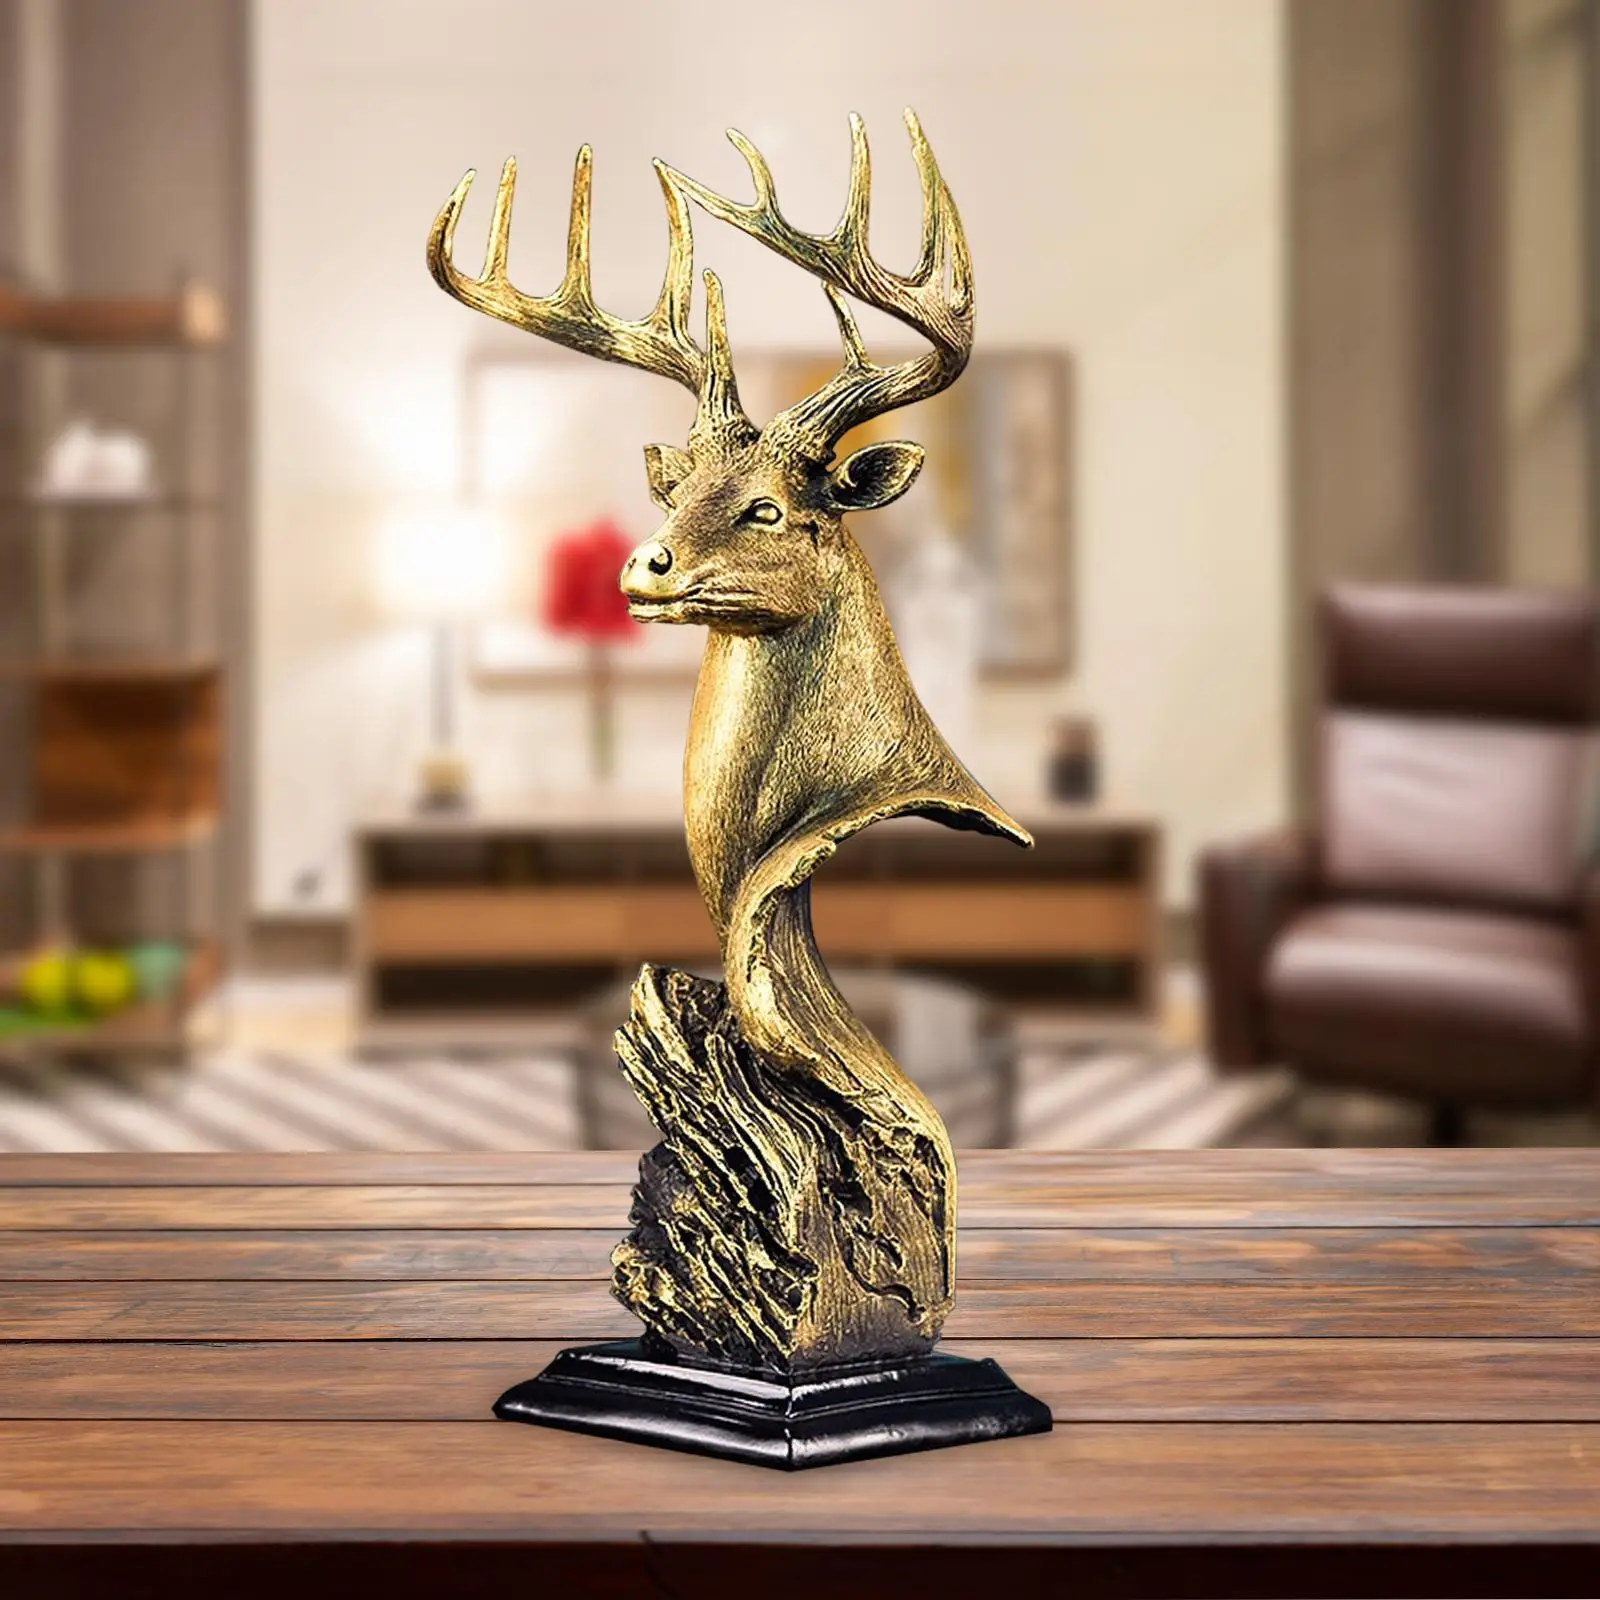 Resin Reindeer Sculptures Shelf Ornaments for Office Study Room Handmade Crafts Accessories Home Furnishing Decorative